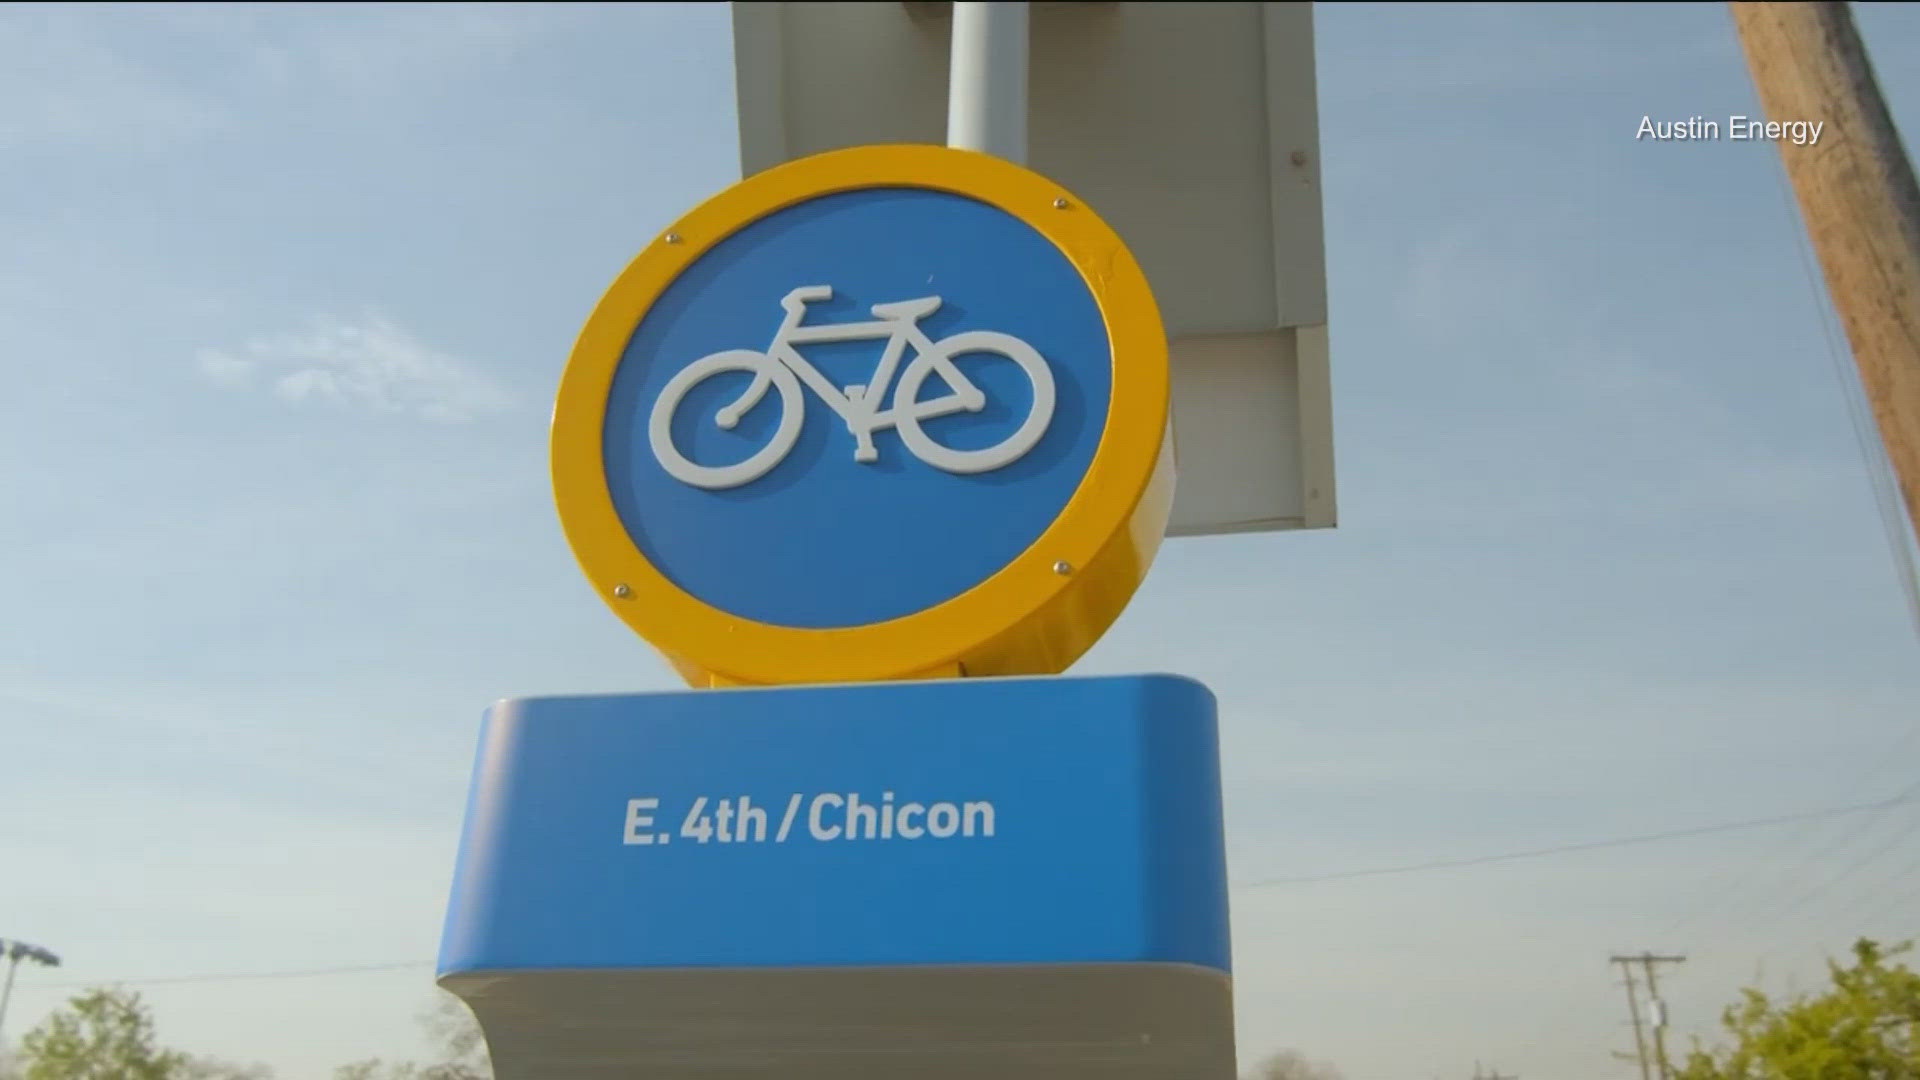 MetroBike will soon become CapMetro Bikeshare, with new changes on the way.